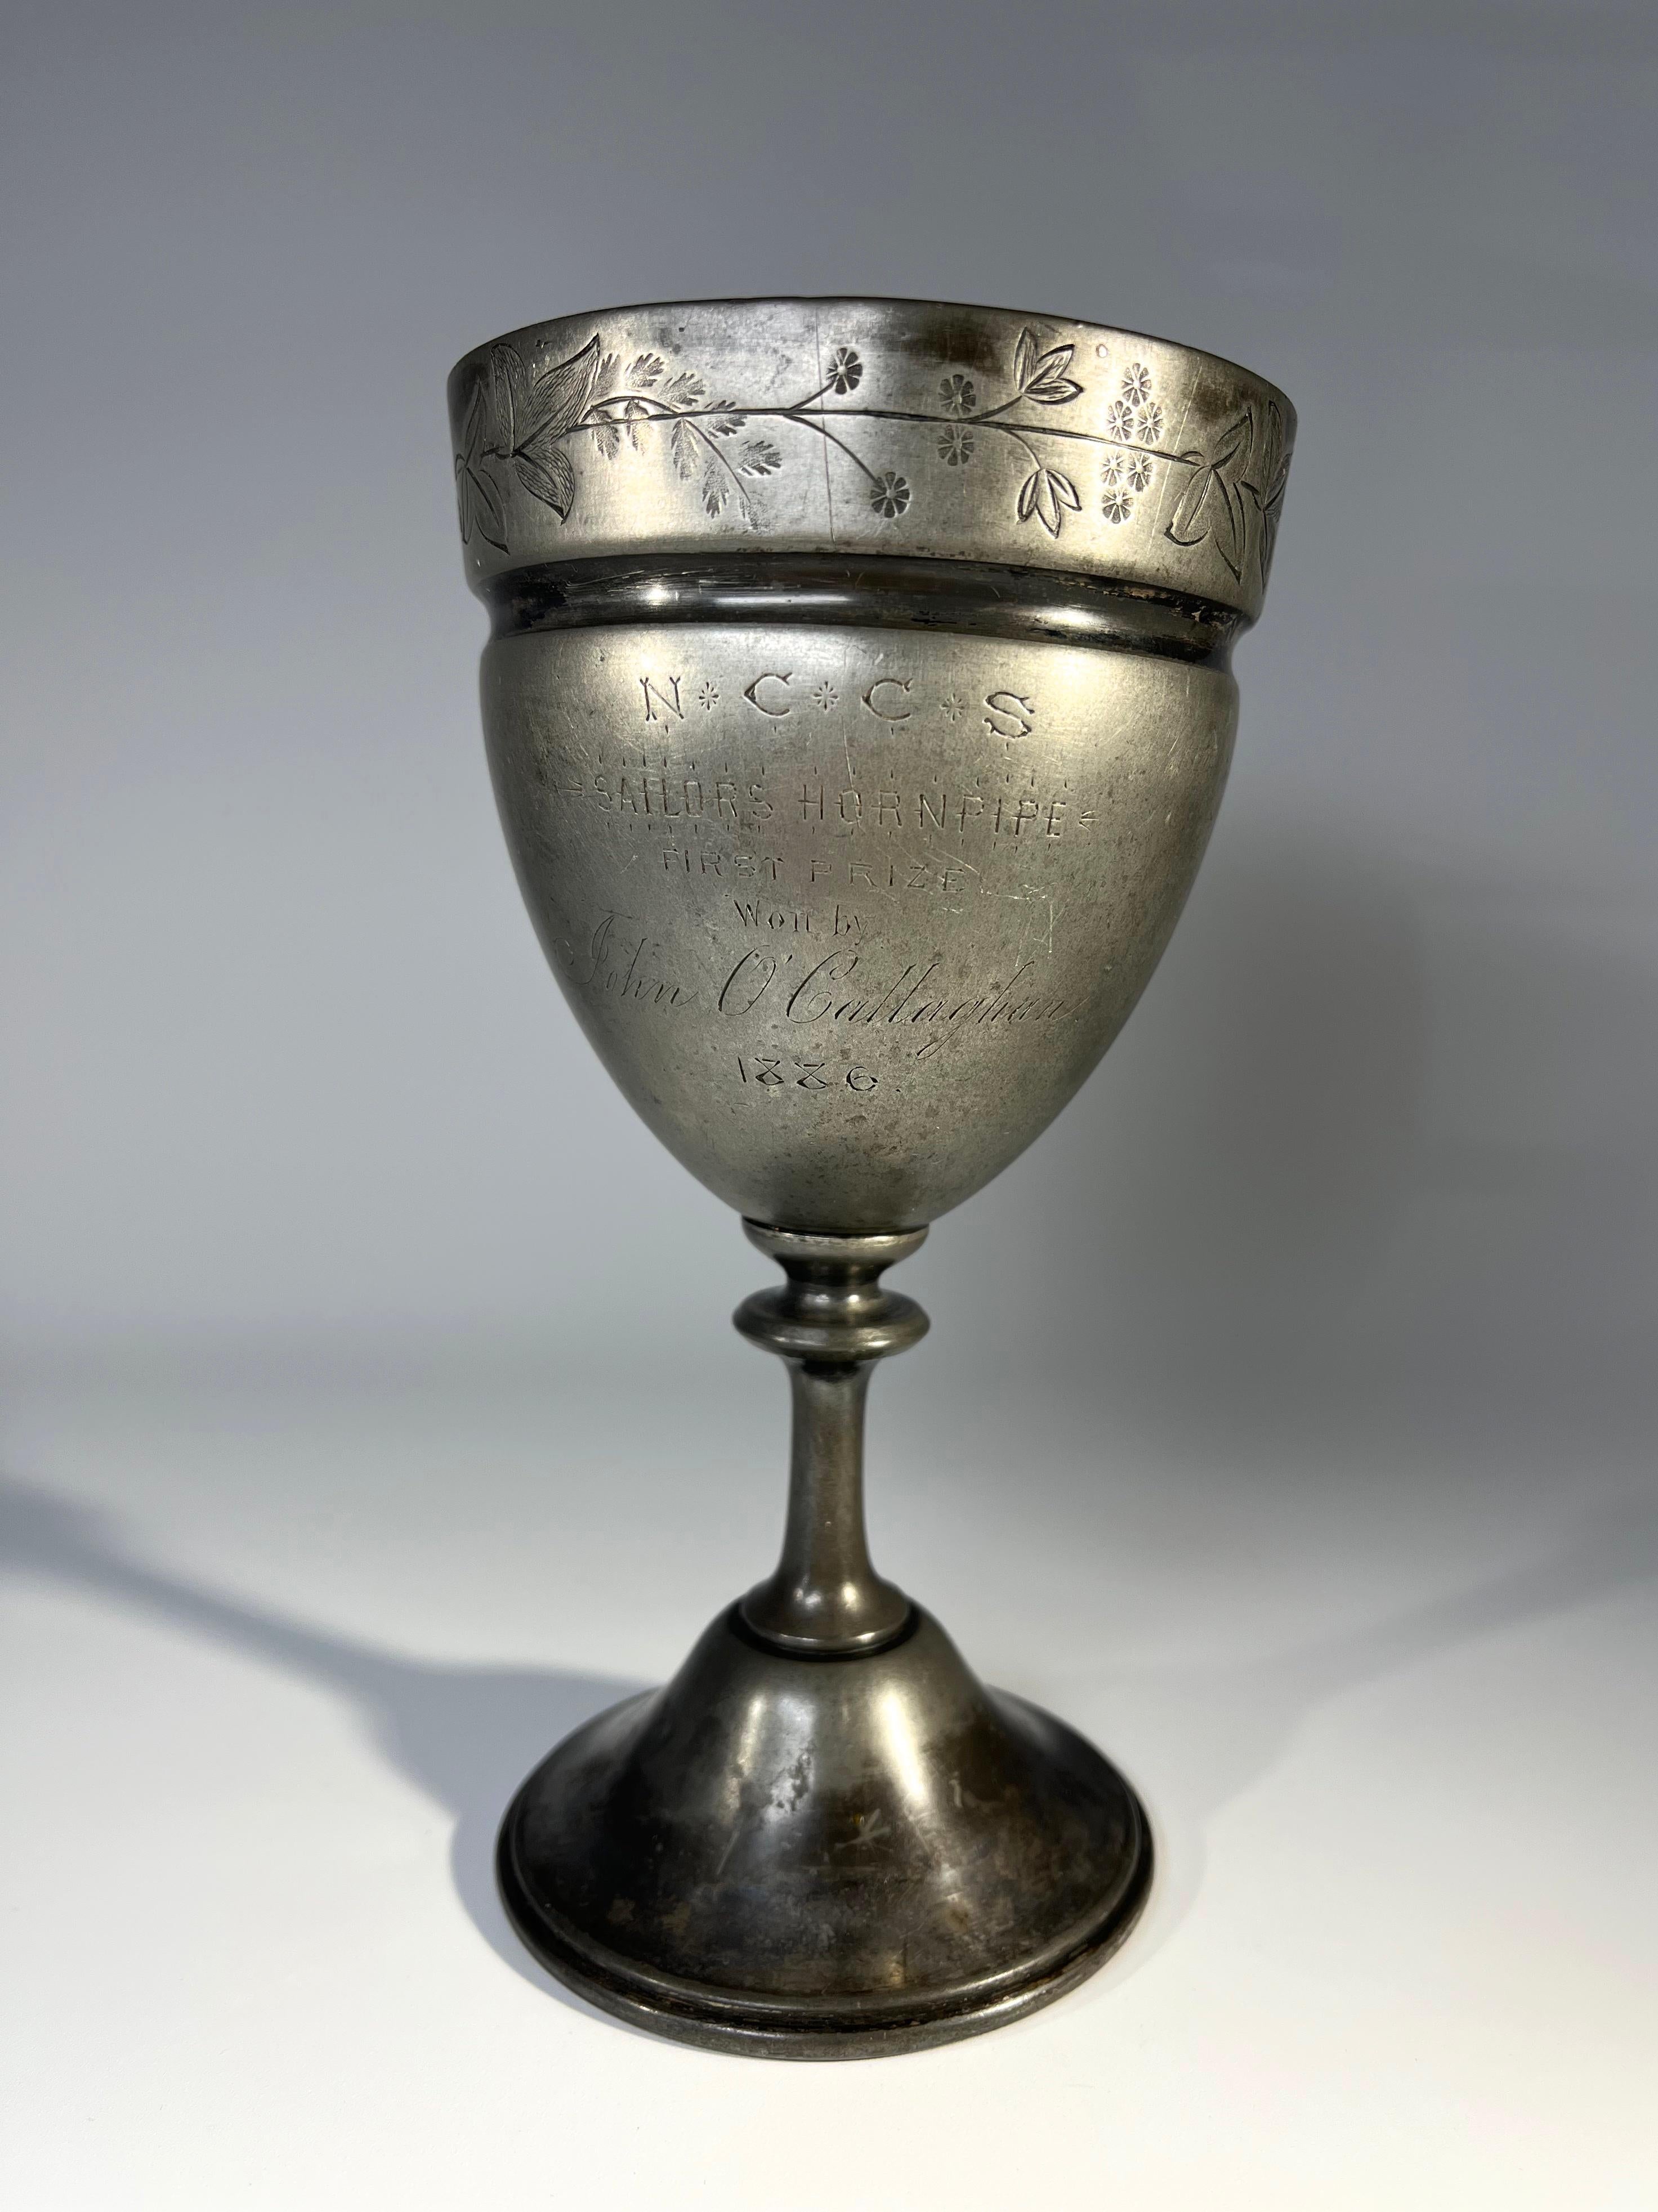 Late 19th Century Sailor's Hornpipe, First Prize, 1886 Inscribed Antique Chalice Trophy